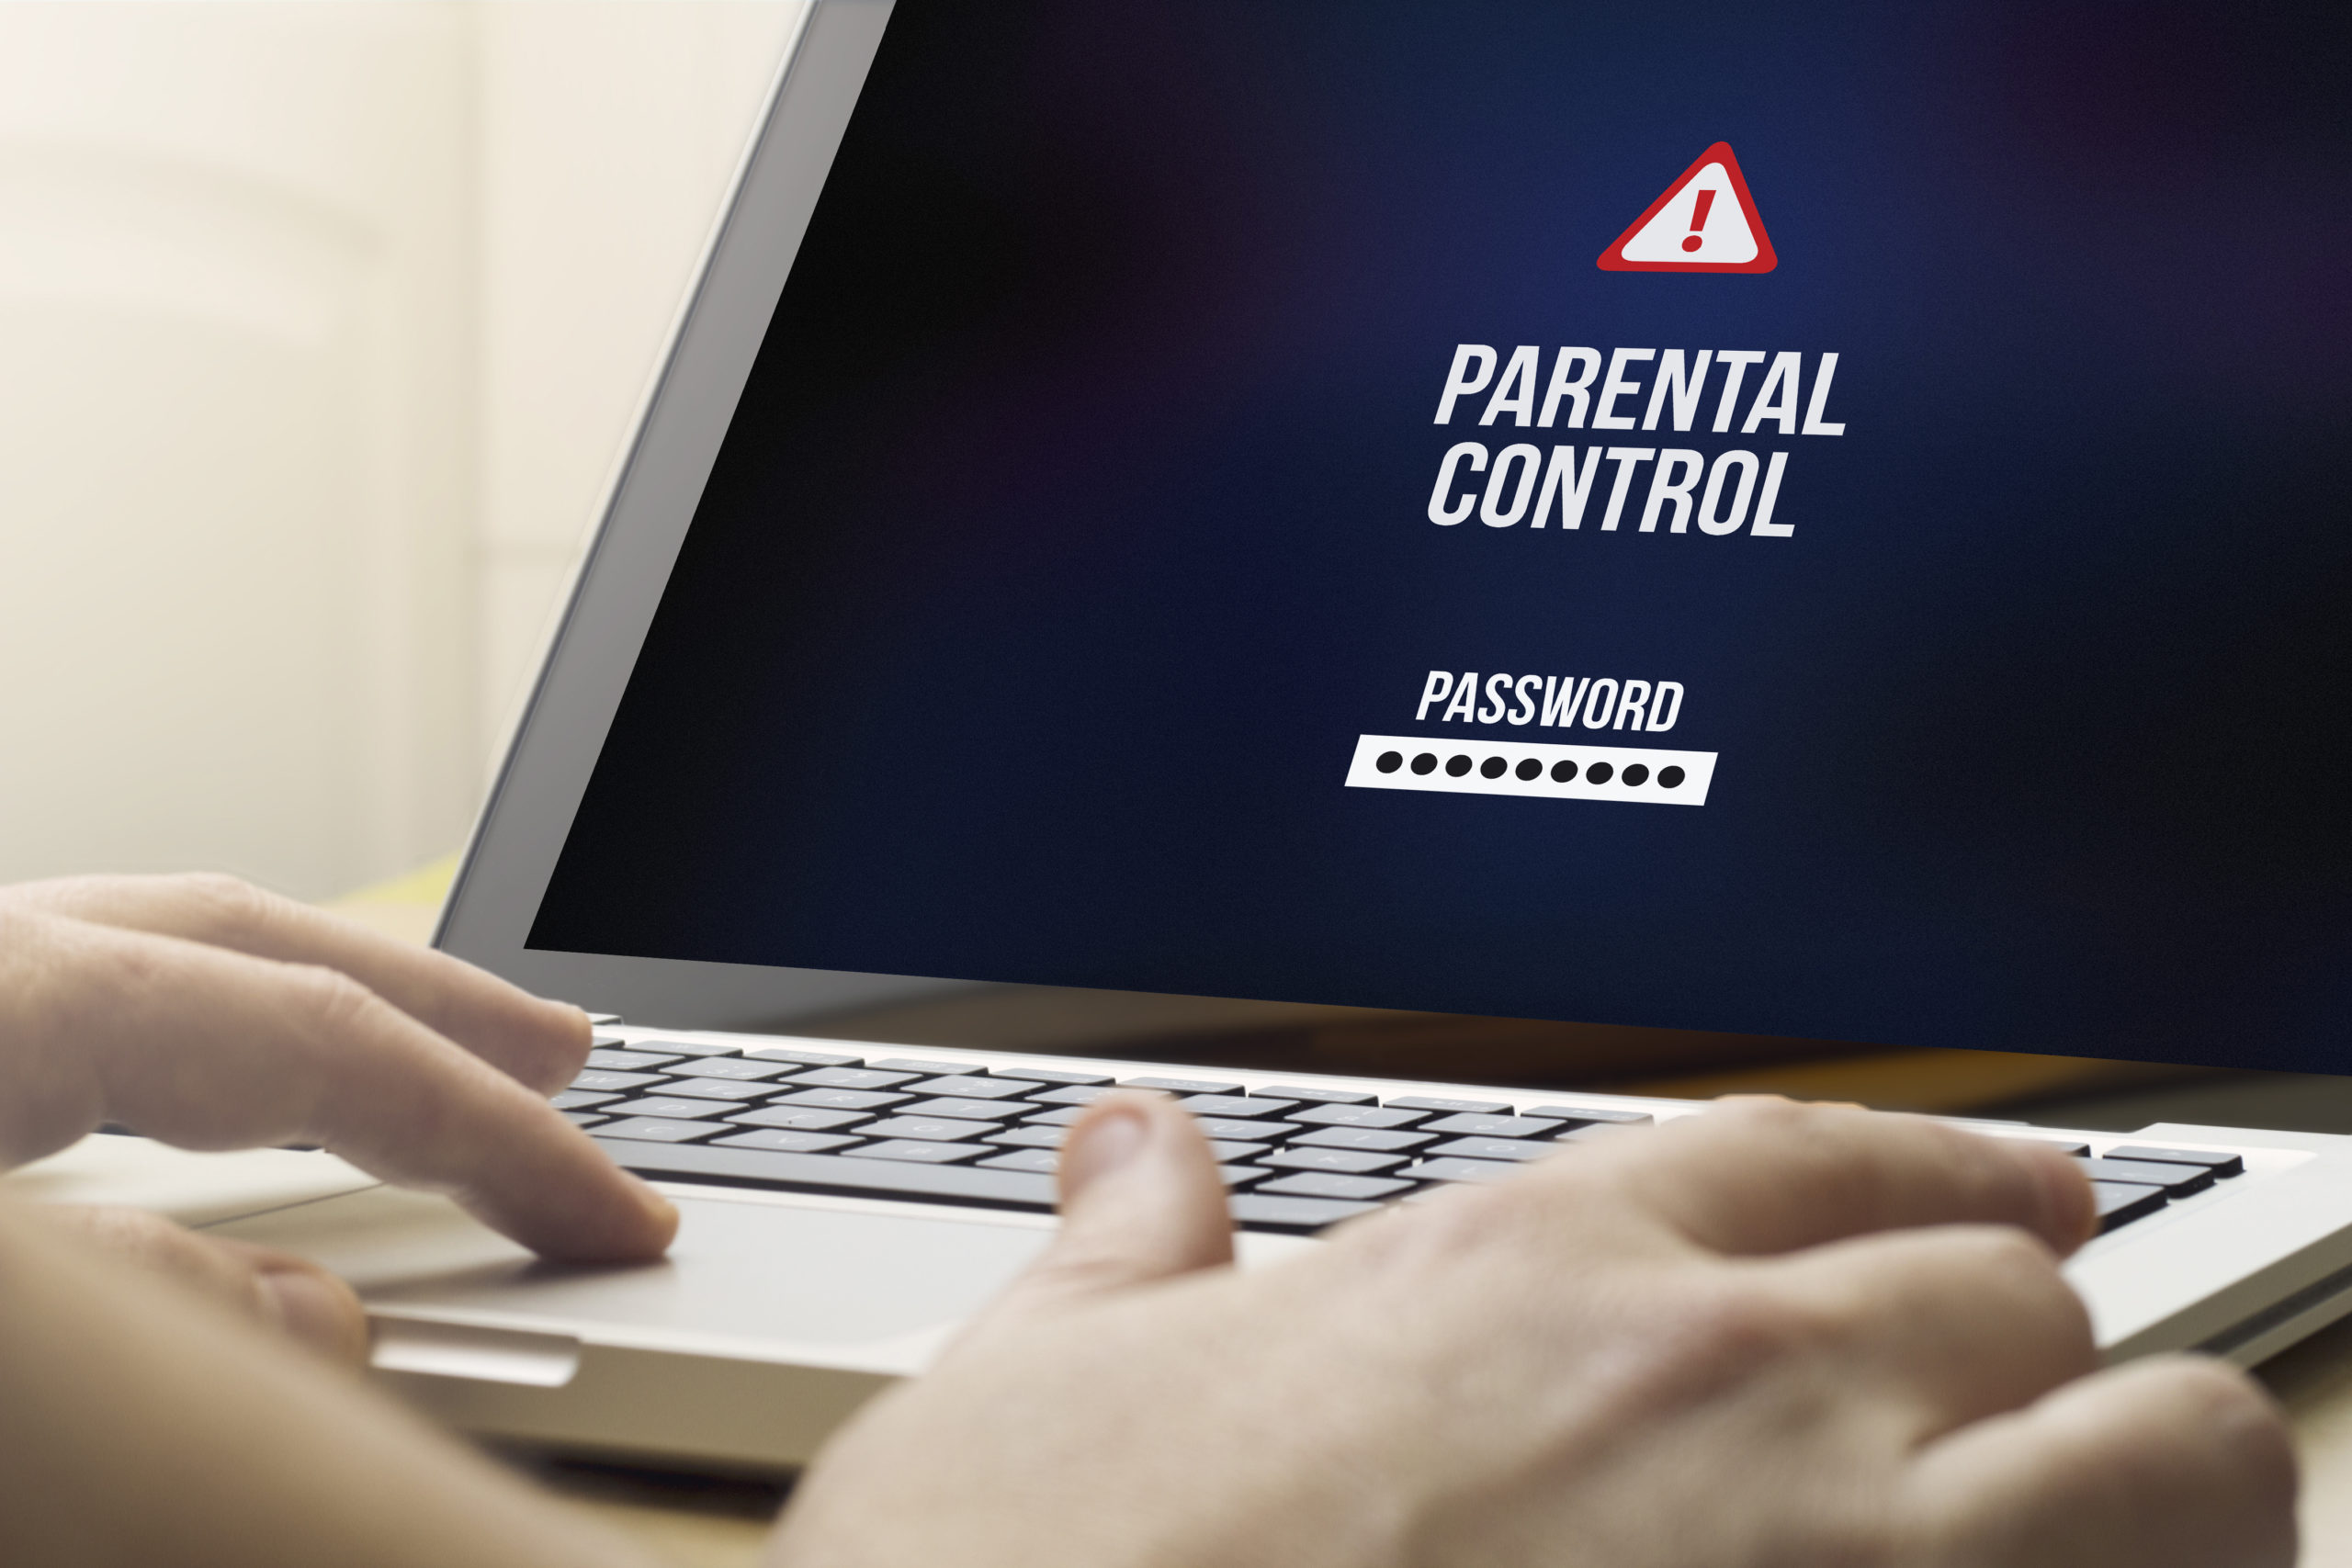 How to track online activities with parental controls